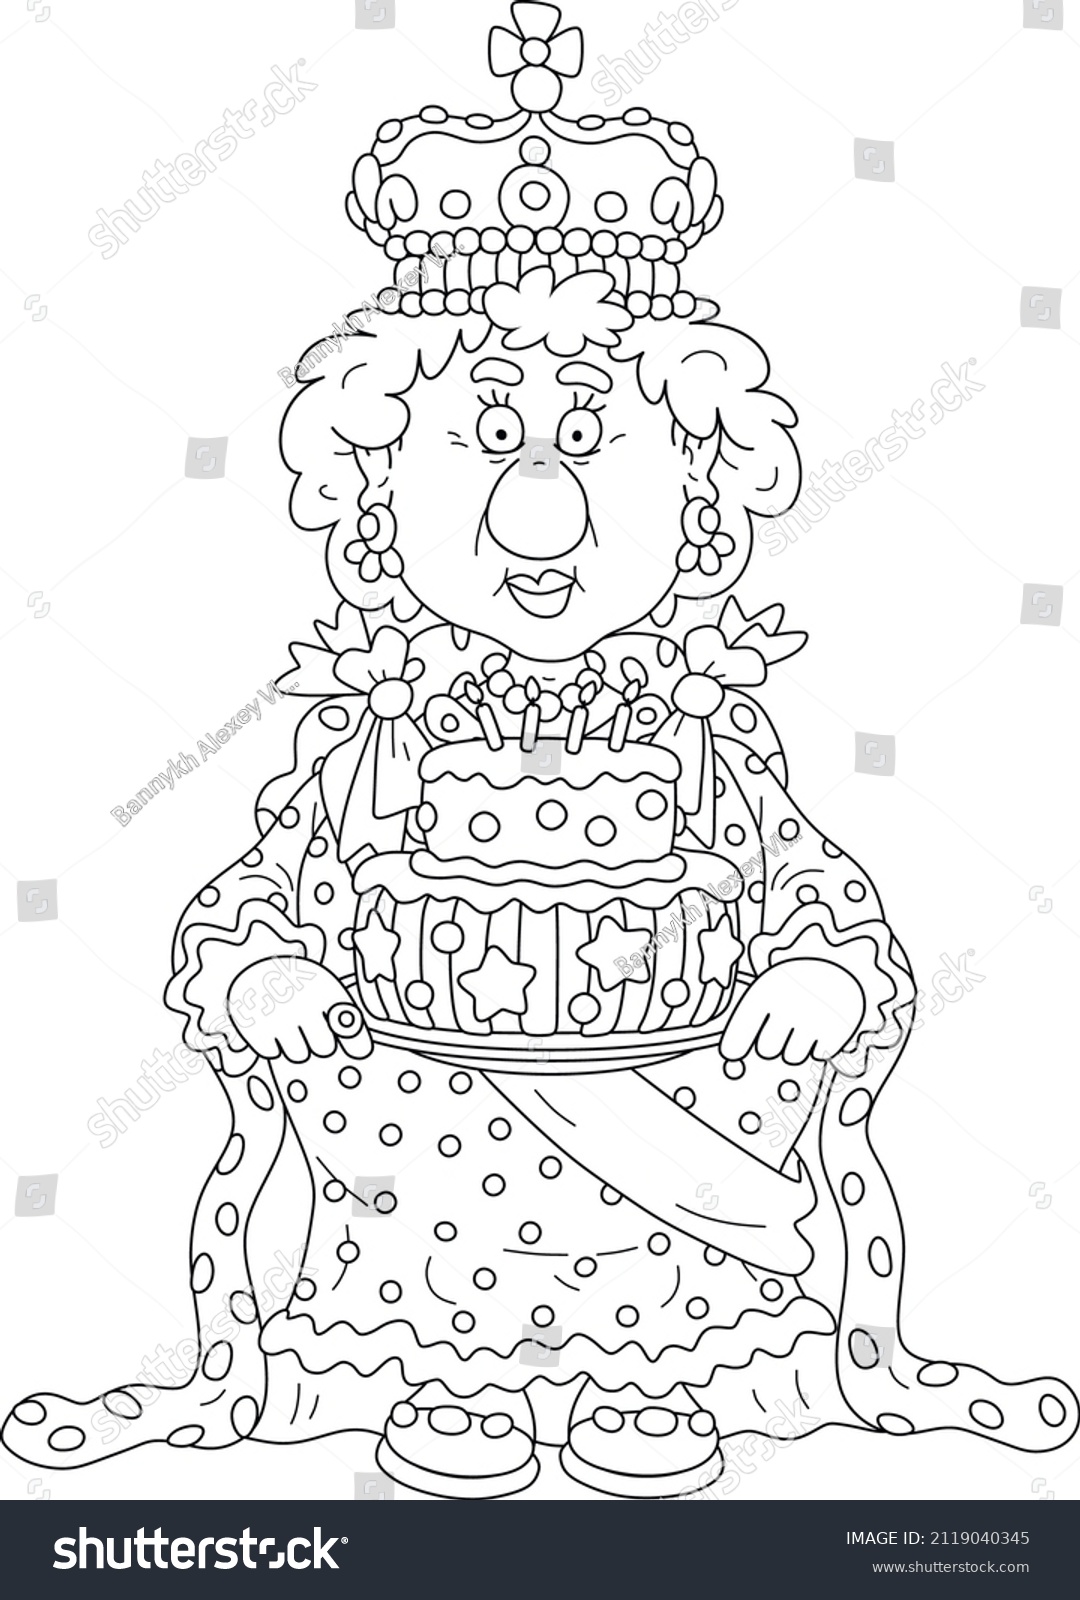 SVG of Queen in a crown and in a solemn royal dress holding a fancy holiday cake decorated with candles and sweet stars at a festive ceremony in a palace, black and white vector cartoon svg